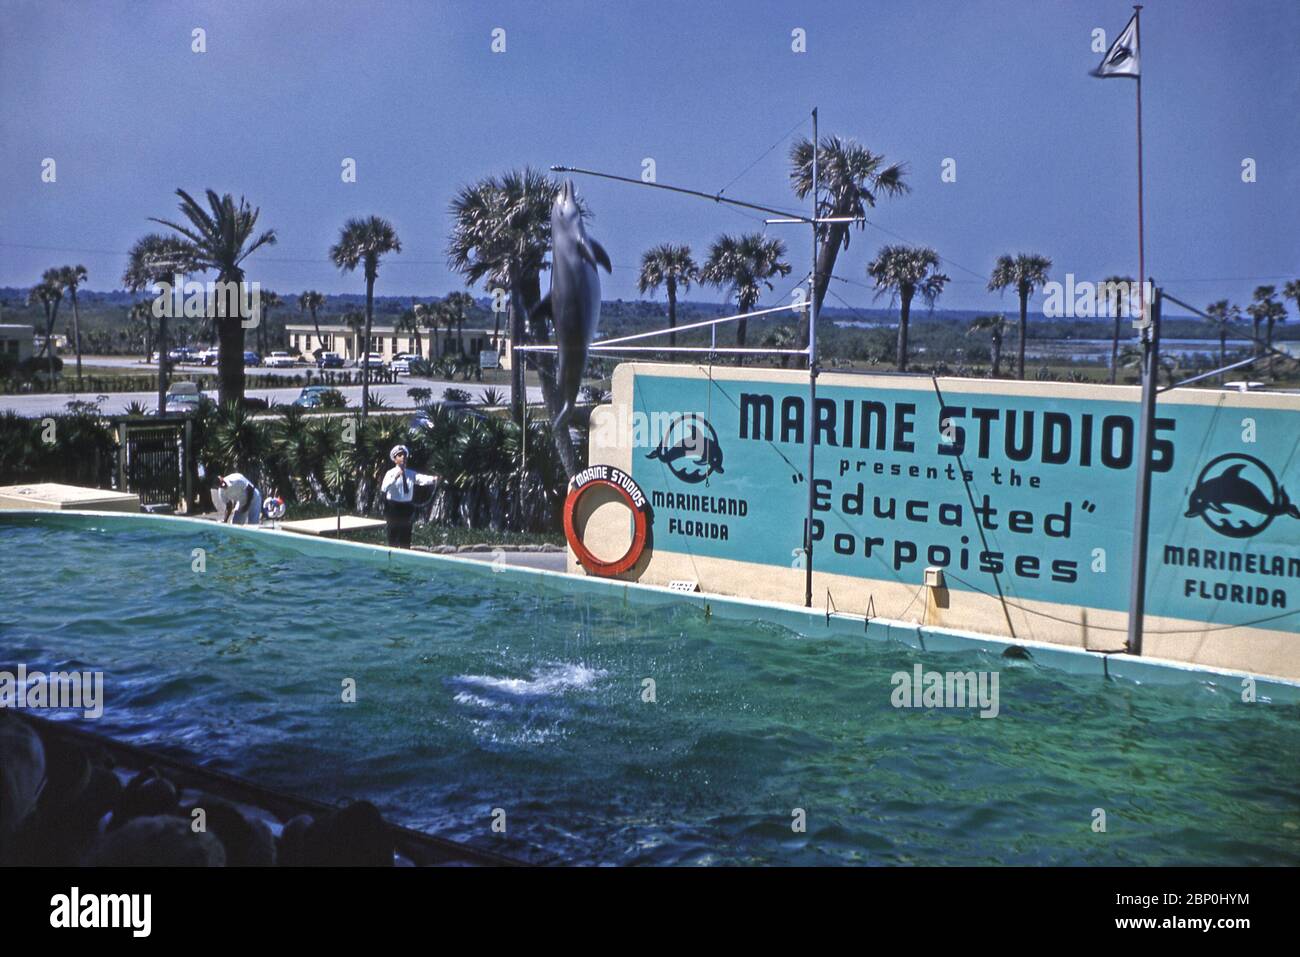 A bottlenose dolphin leaps high in the air at a show at Marine Studios, Marineland, Florida, USA 1962. Mention of 'educated porpoises' in the photograph is misleading as the mammals trained and used in the shows were almost always bottlenose dolphins. Marine Studios was one of Florida's first marine mammal parks, is known as 'the world's first oceanarium'. The attraction opened in 1938, with its main draw being the bottlenose dolphin. It was immediately successful. Marine Studios was later renamed 'Marineland of Florida'. Stock Photo